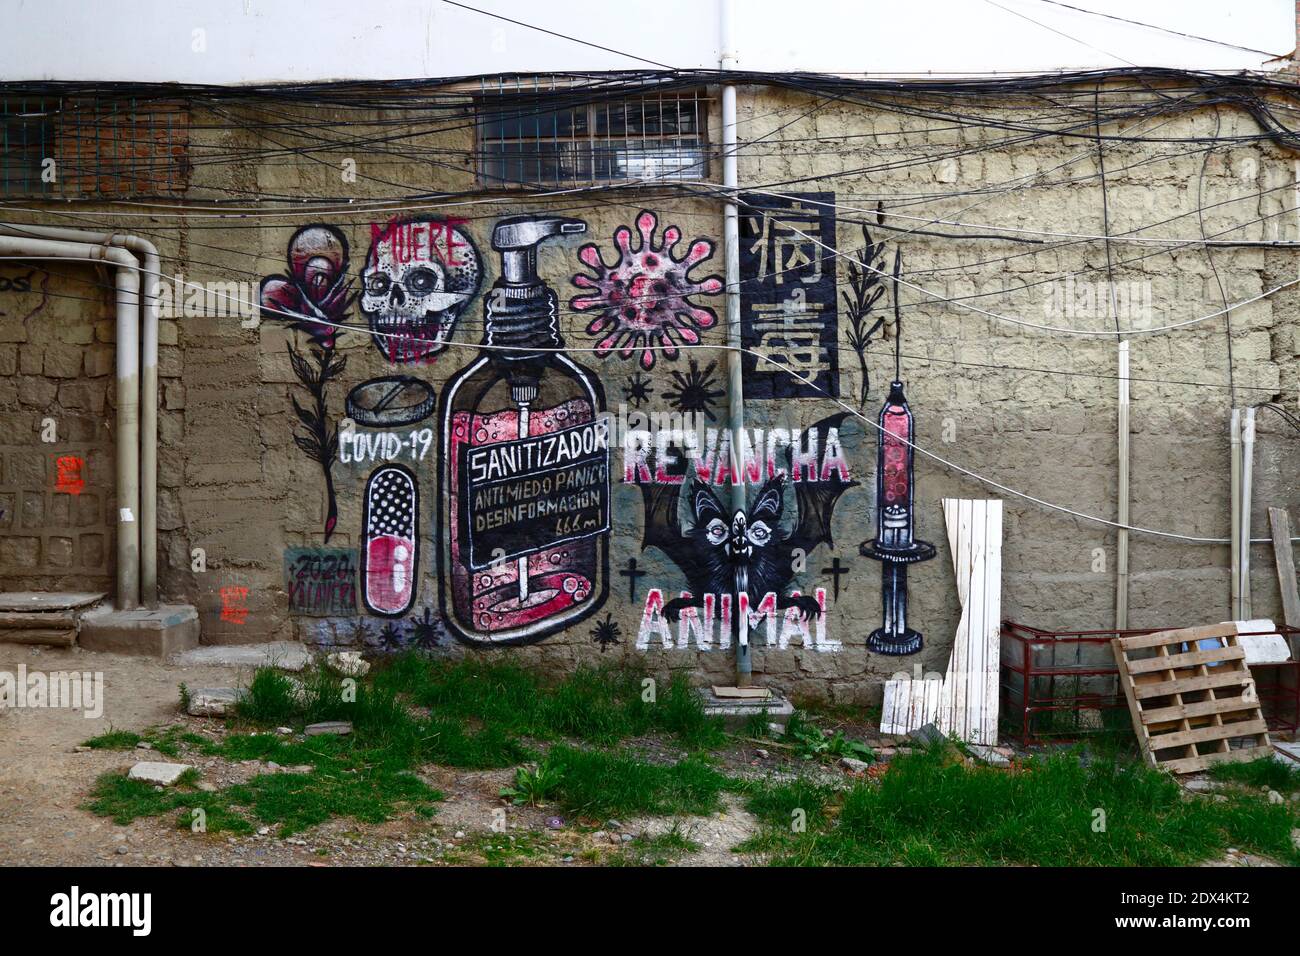 23rd December 2020, LA PAZ, BOLIVIA: Sarcastic covid 19 coronavirus street art on a wall in La Paz.  The bottle of hand sanitizer is to prevent fear, panic and disinformation, a reference to the amount of sensational articles about the virus in the news and on social media. Next to it is a bat with the slogan Revancha Animal / Animal Revenge, a reference to the damage being done to the environment, especially deforestation Stock Photo